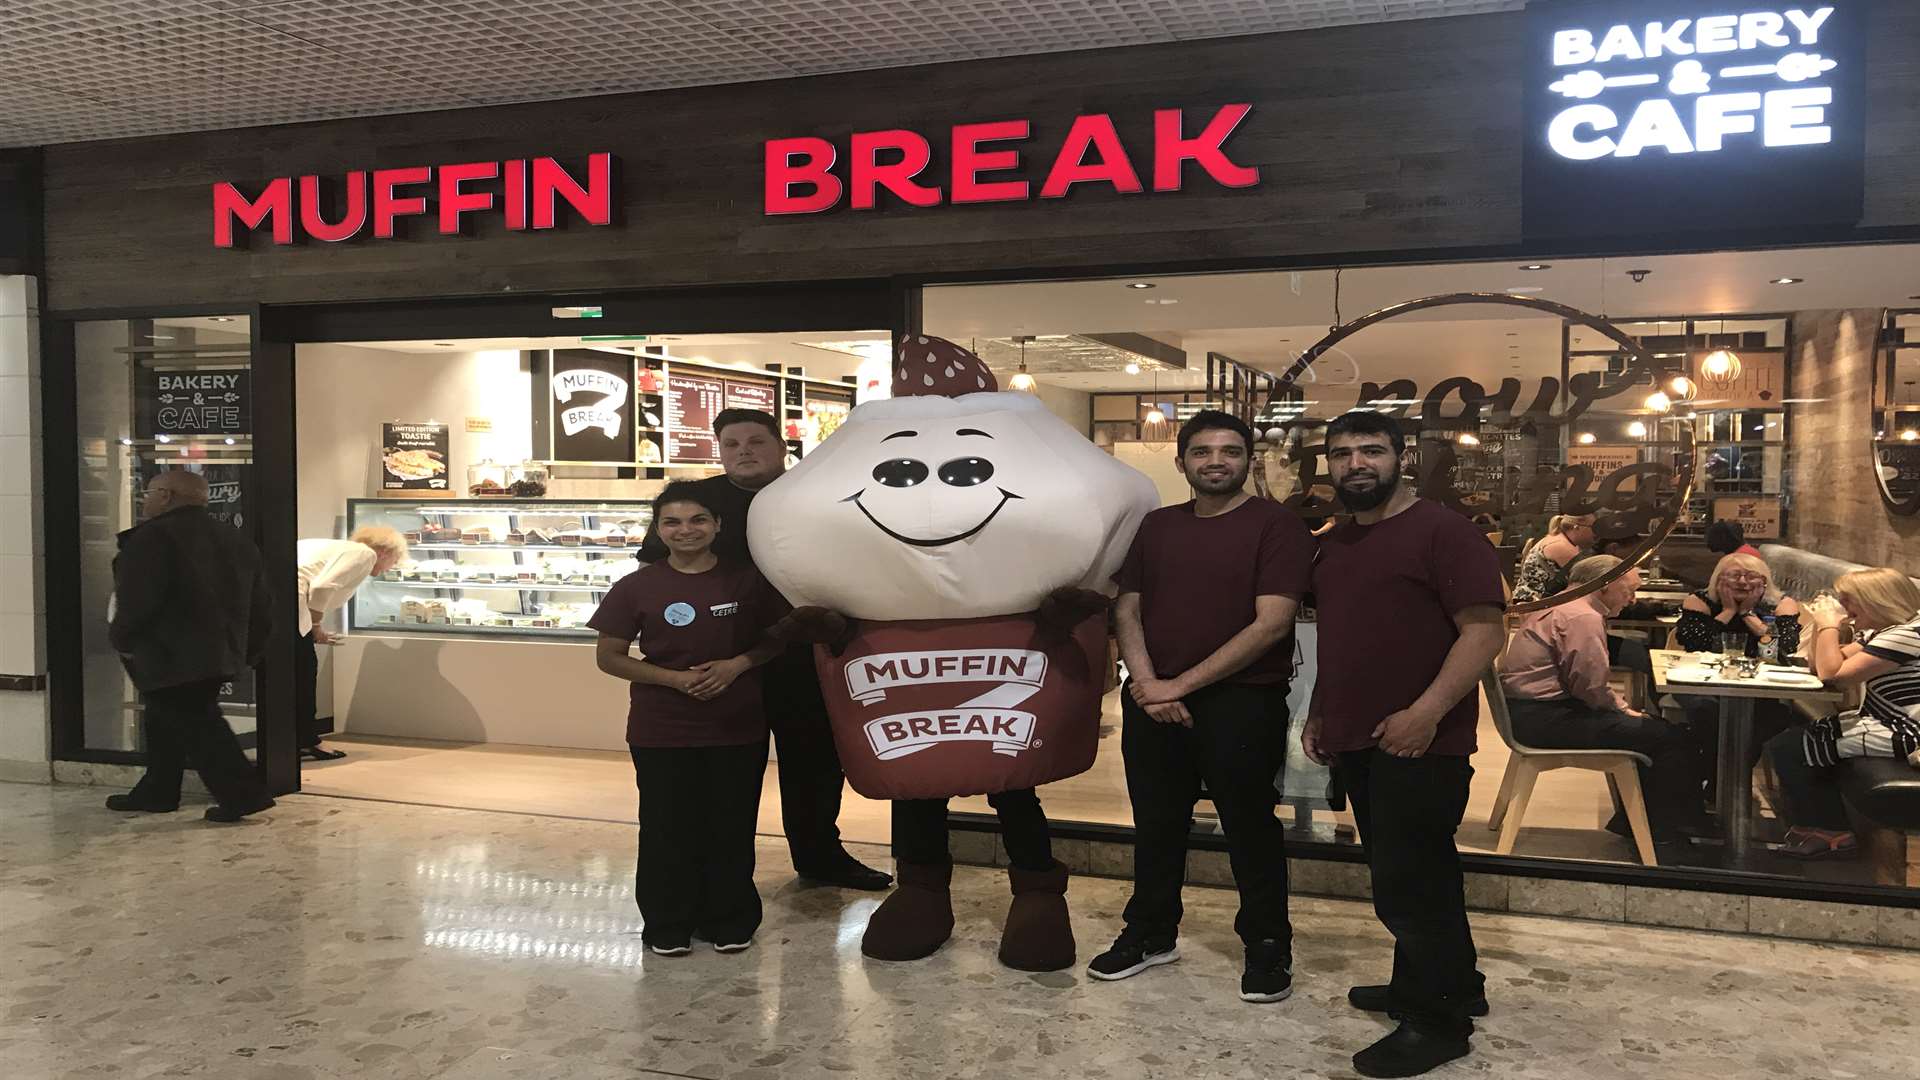 Muffin Break has opened in the Pentagon shopping centre